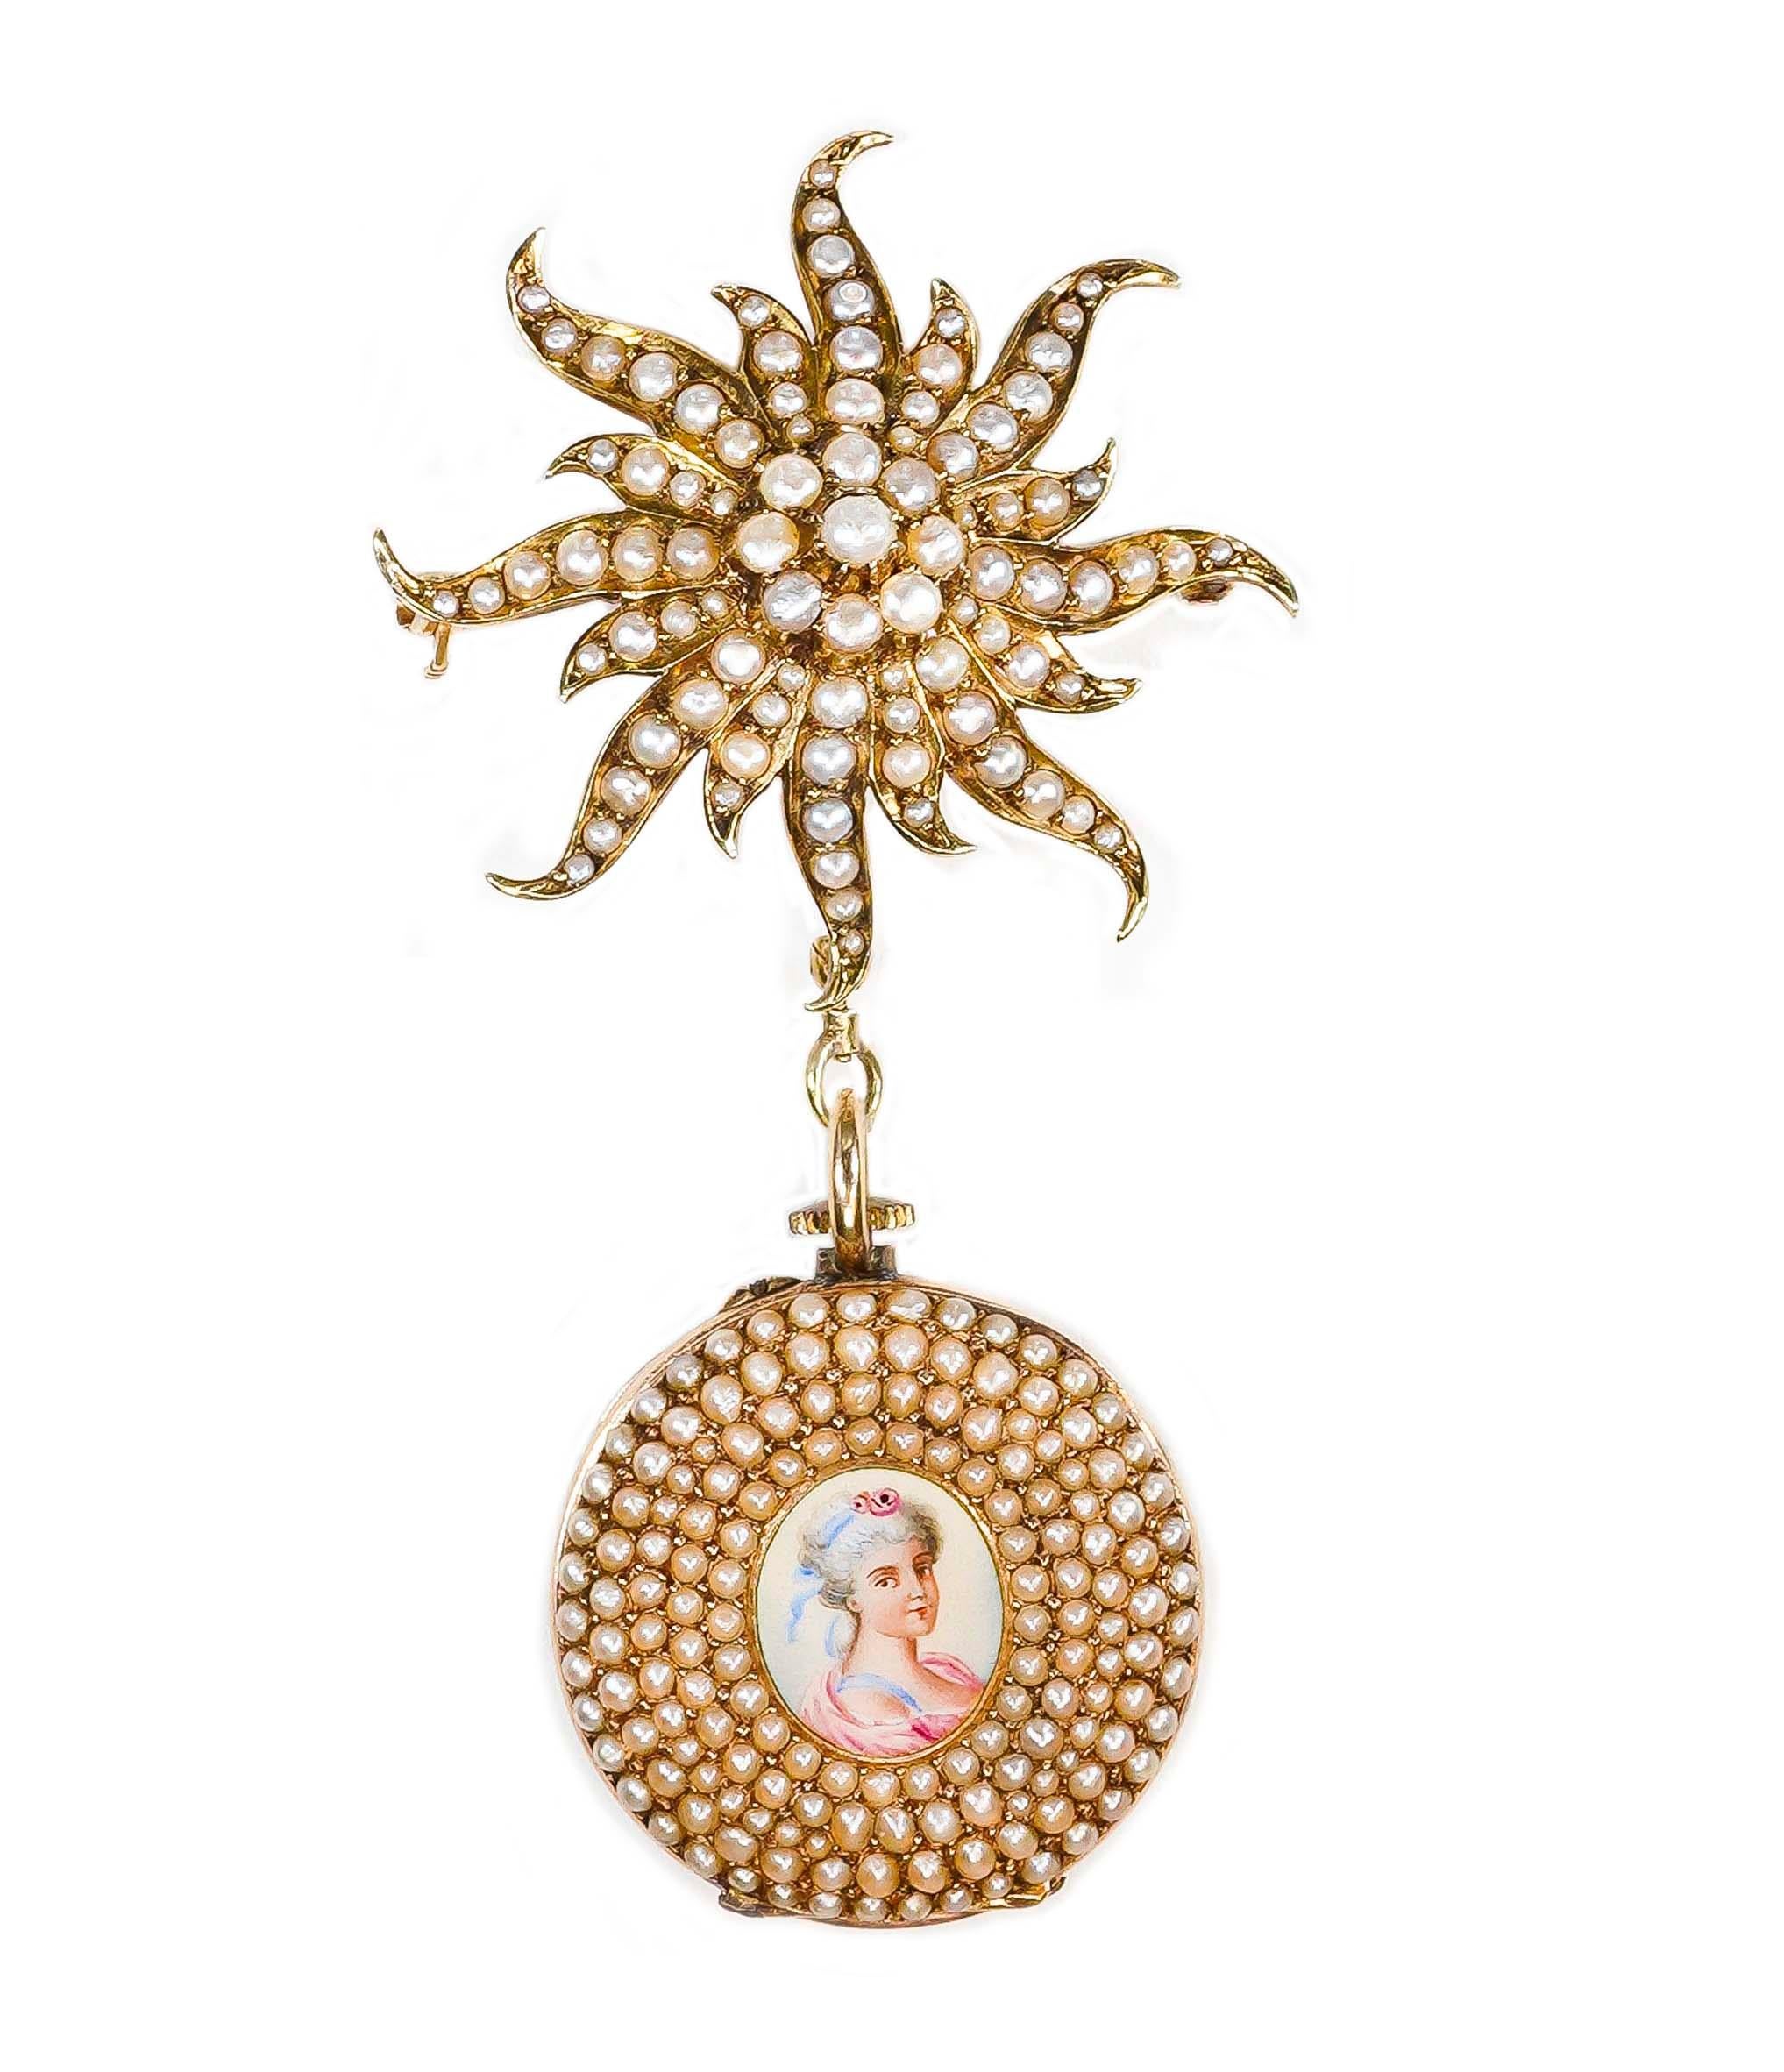 An Impressive & Large Art Nouveau 1800s,  Pearl Set Star Shaped Pendant with a beautifully preserved Enamel Portrait of French Bourgeoisie Woman 

Basic Specifications & Case Dimensions

- 72mm Height (Top of Pin to Bottom of Pendant Watch)
-